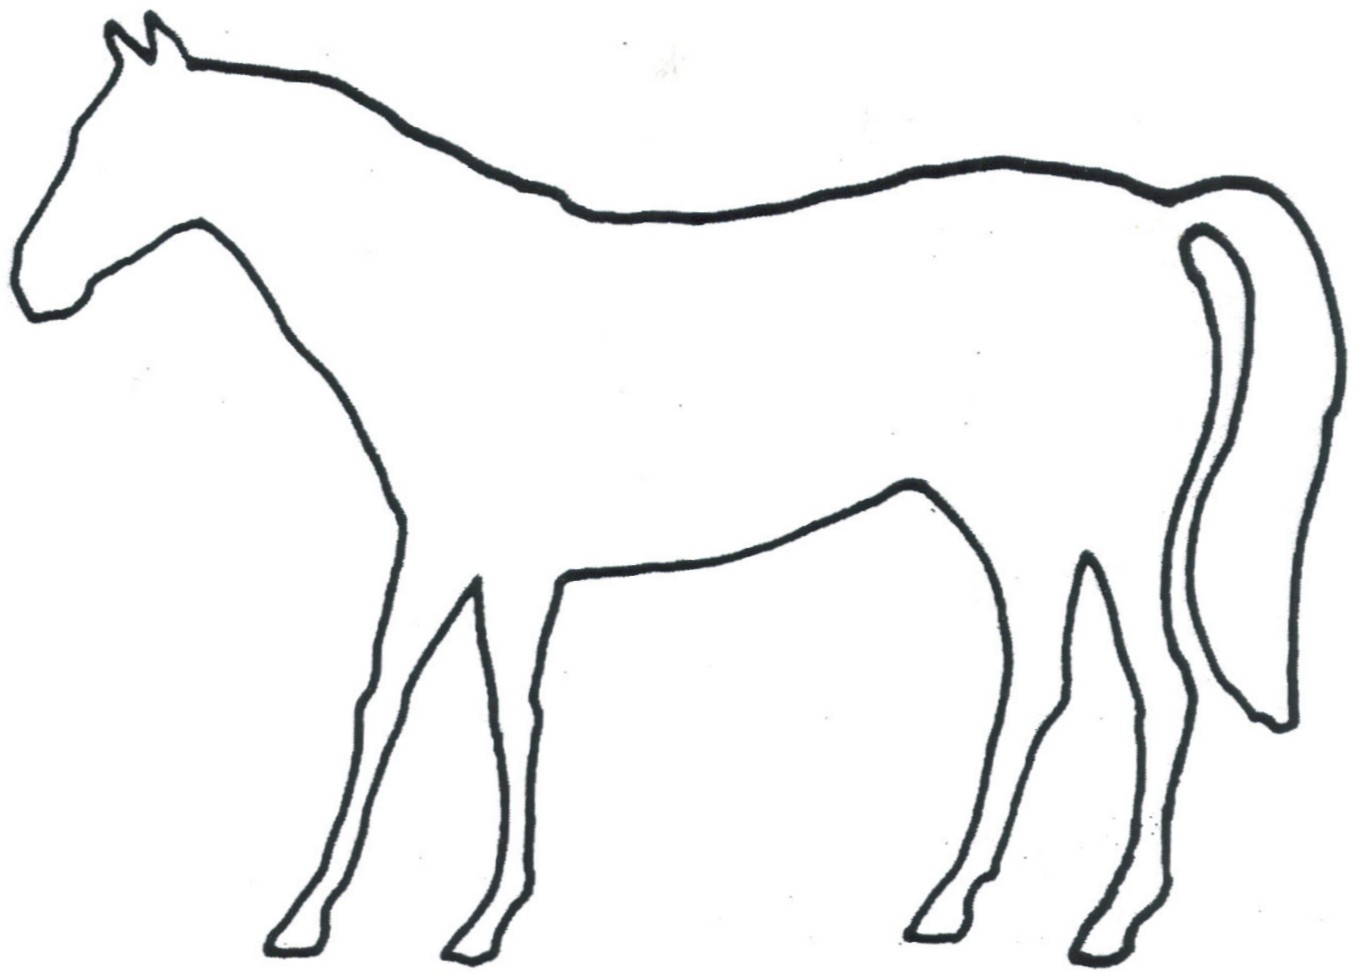 Running Horse Outline   Clipart Panda   Free Clipart Images